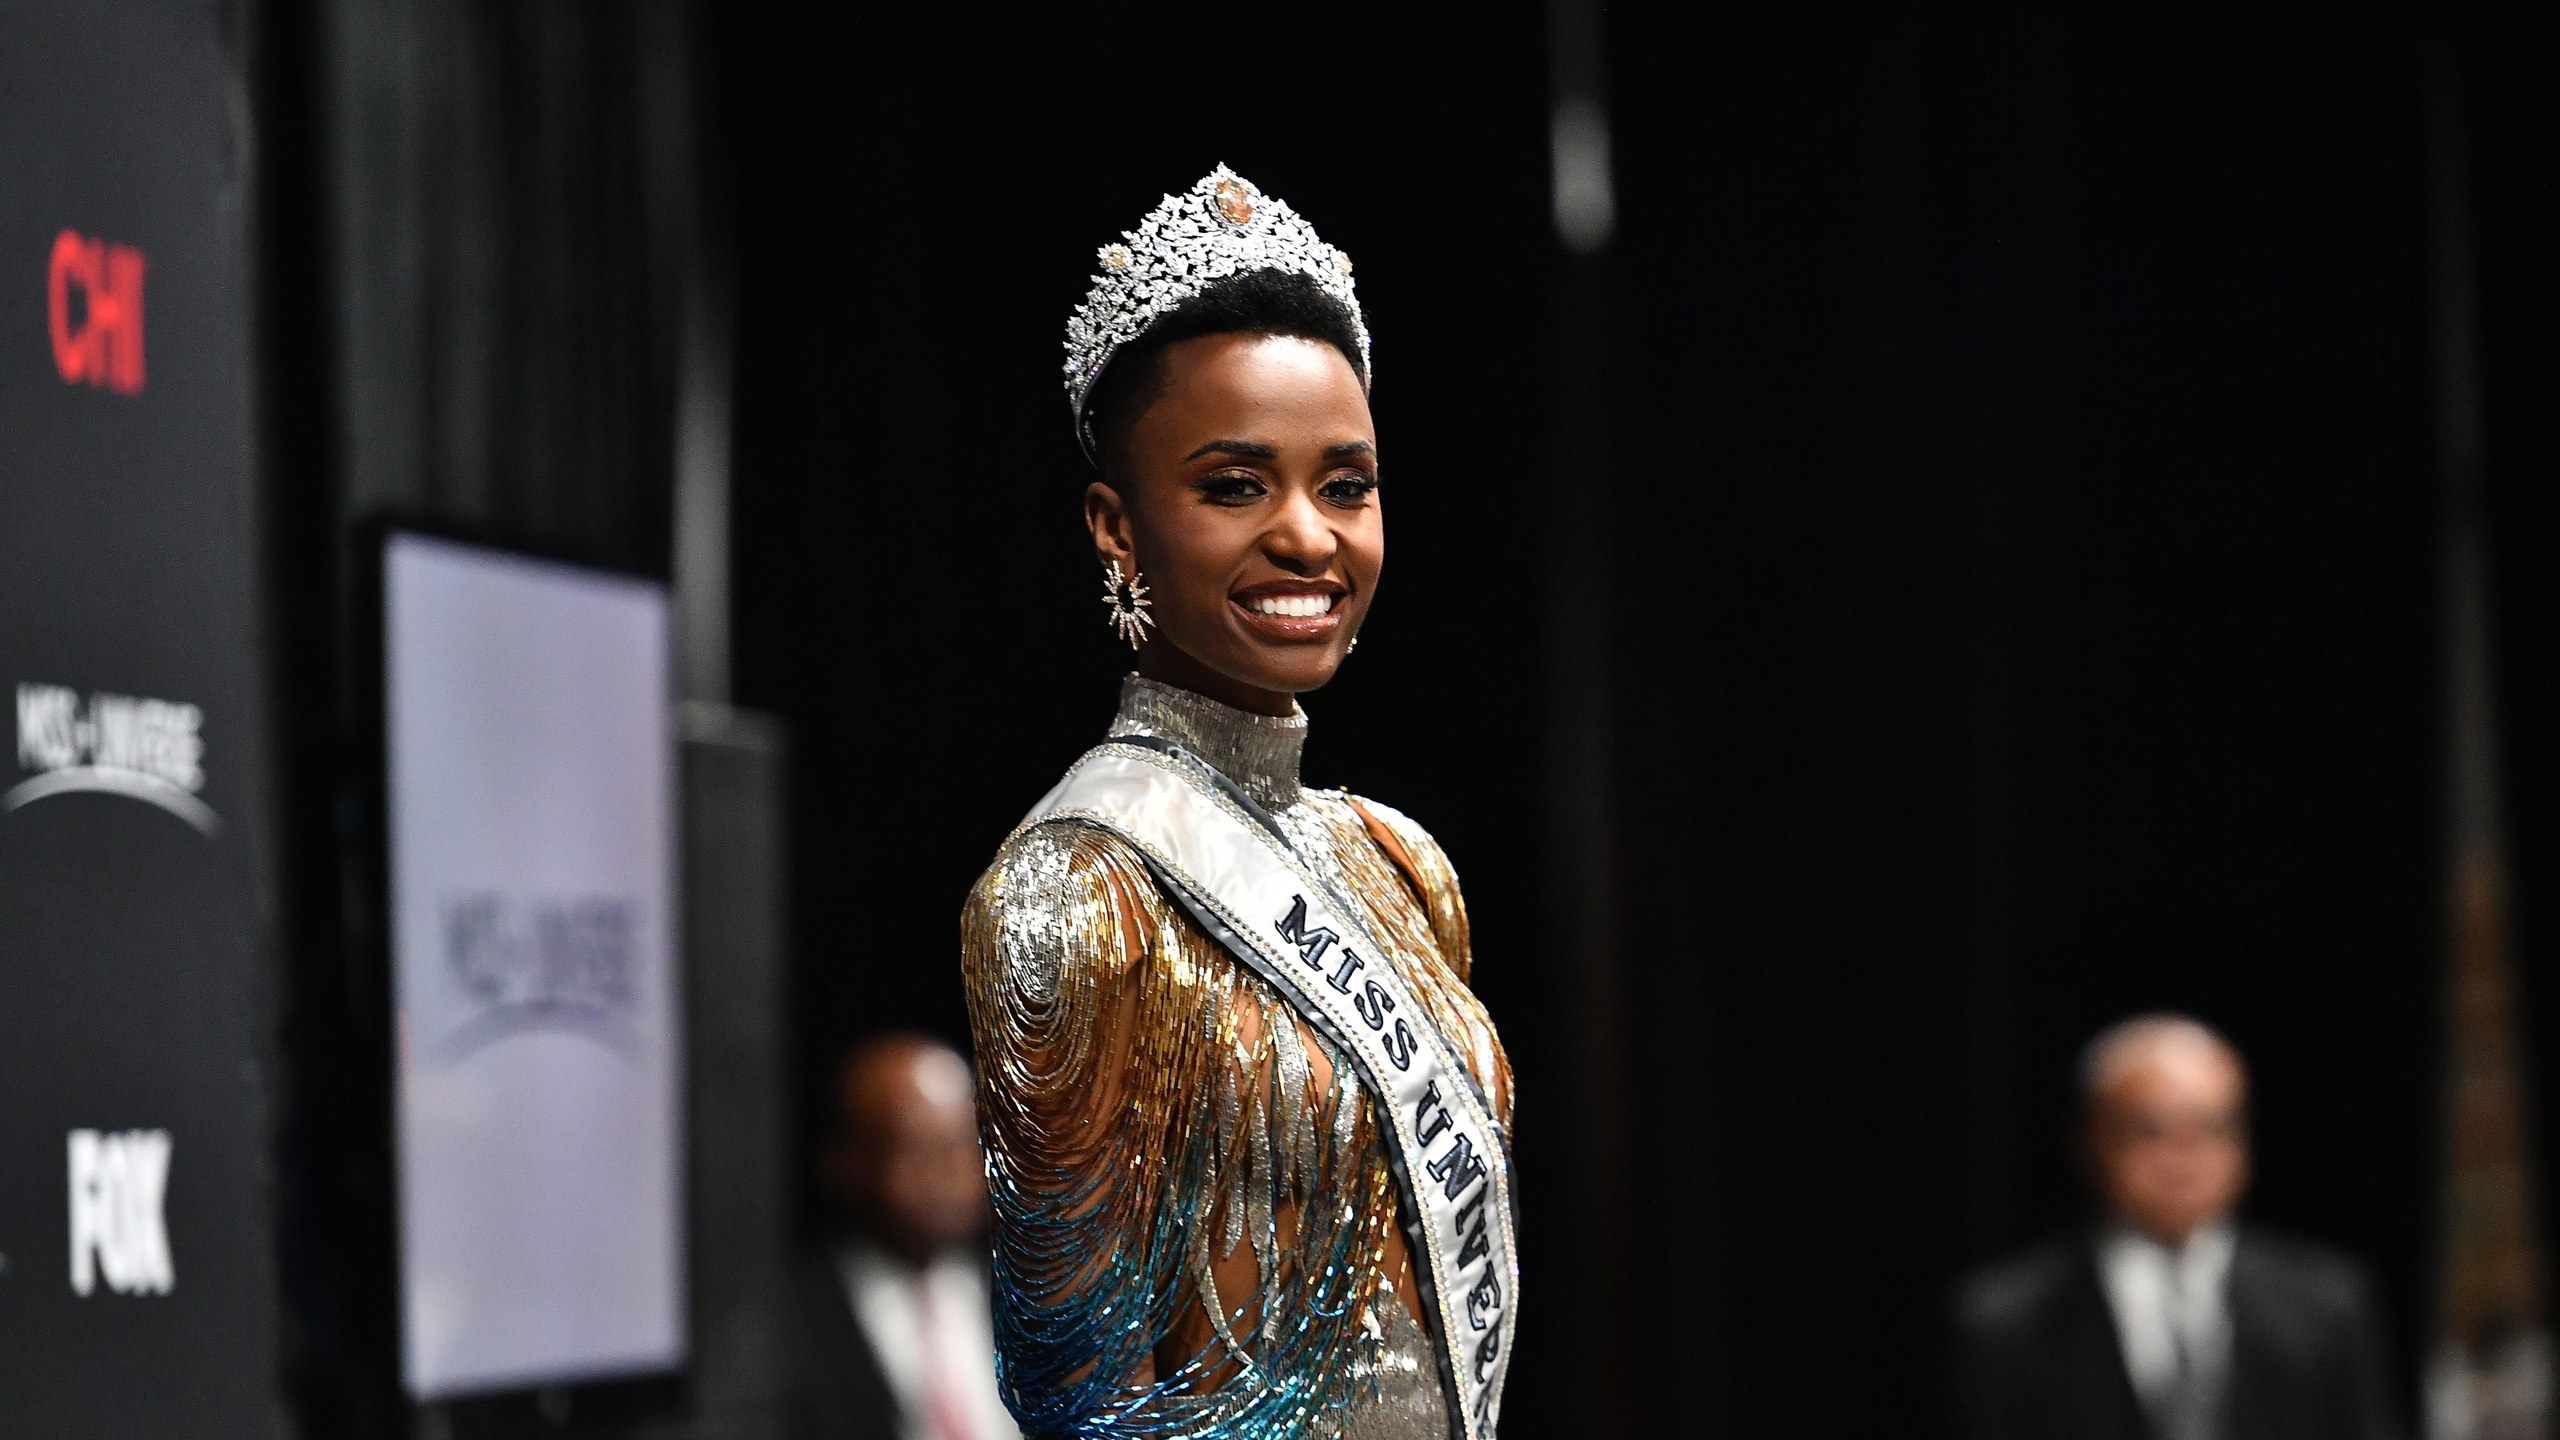 MISS SOUTH AFRICA WINS 2019 MISS UNIVERSE CROWN